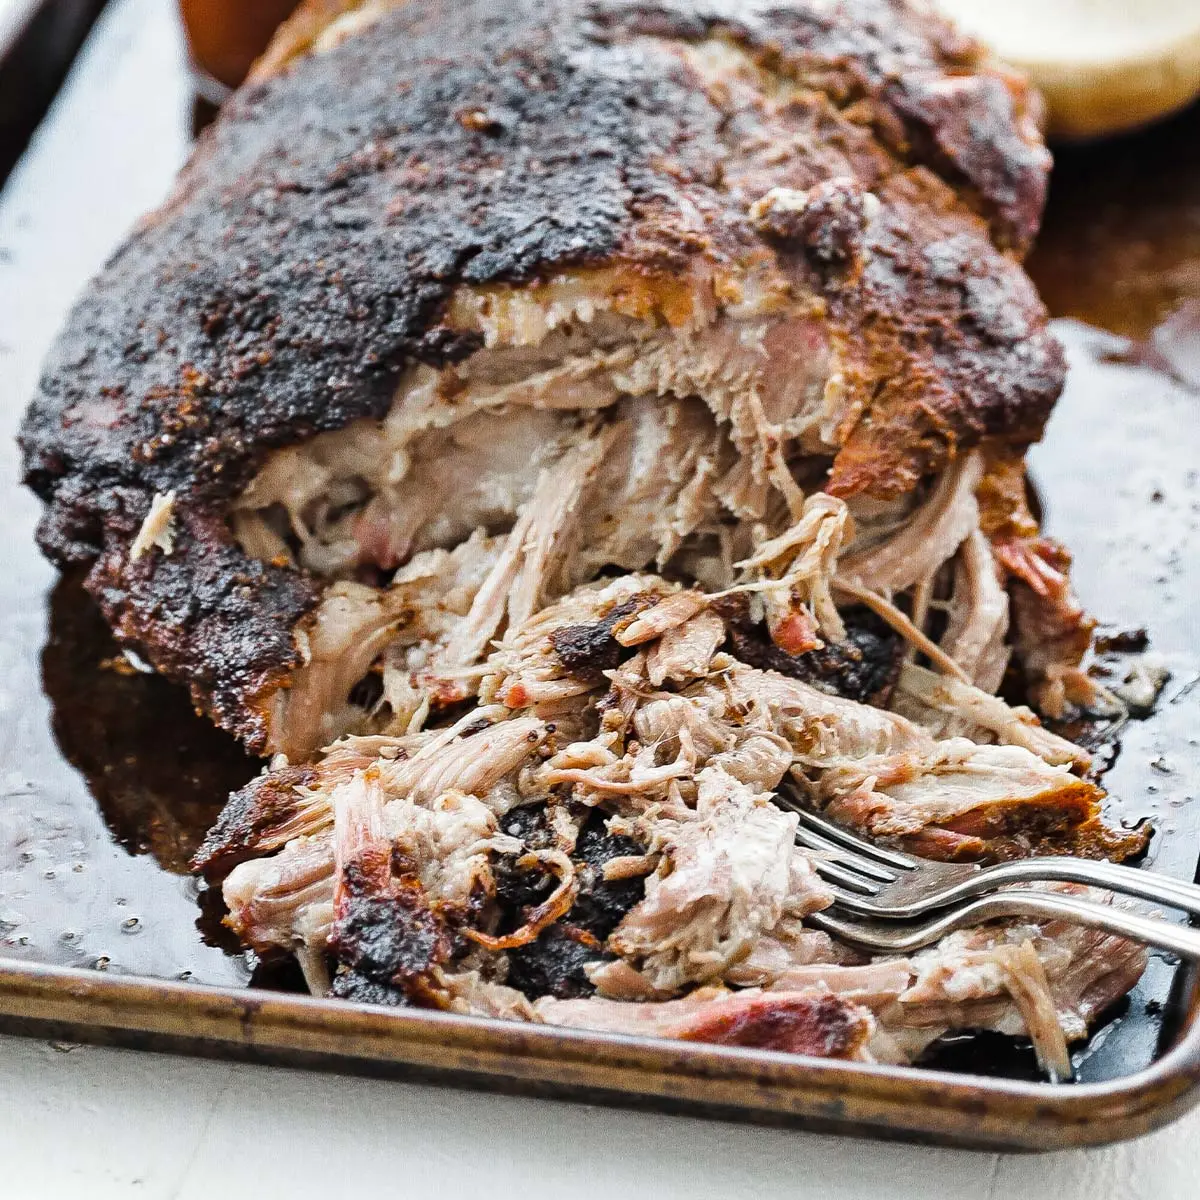 smoked pulled pork cooking time - Can you over cook smoked pulled pork